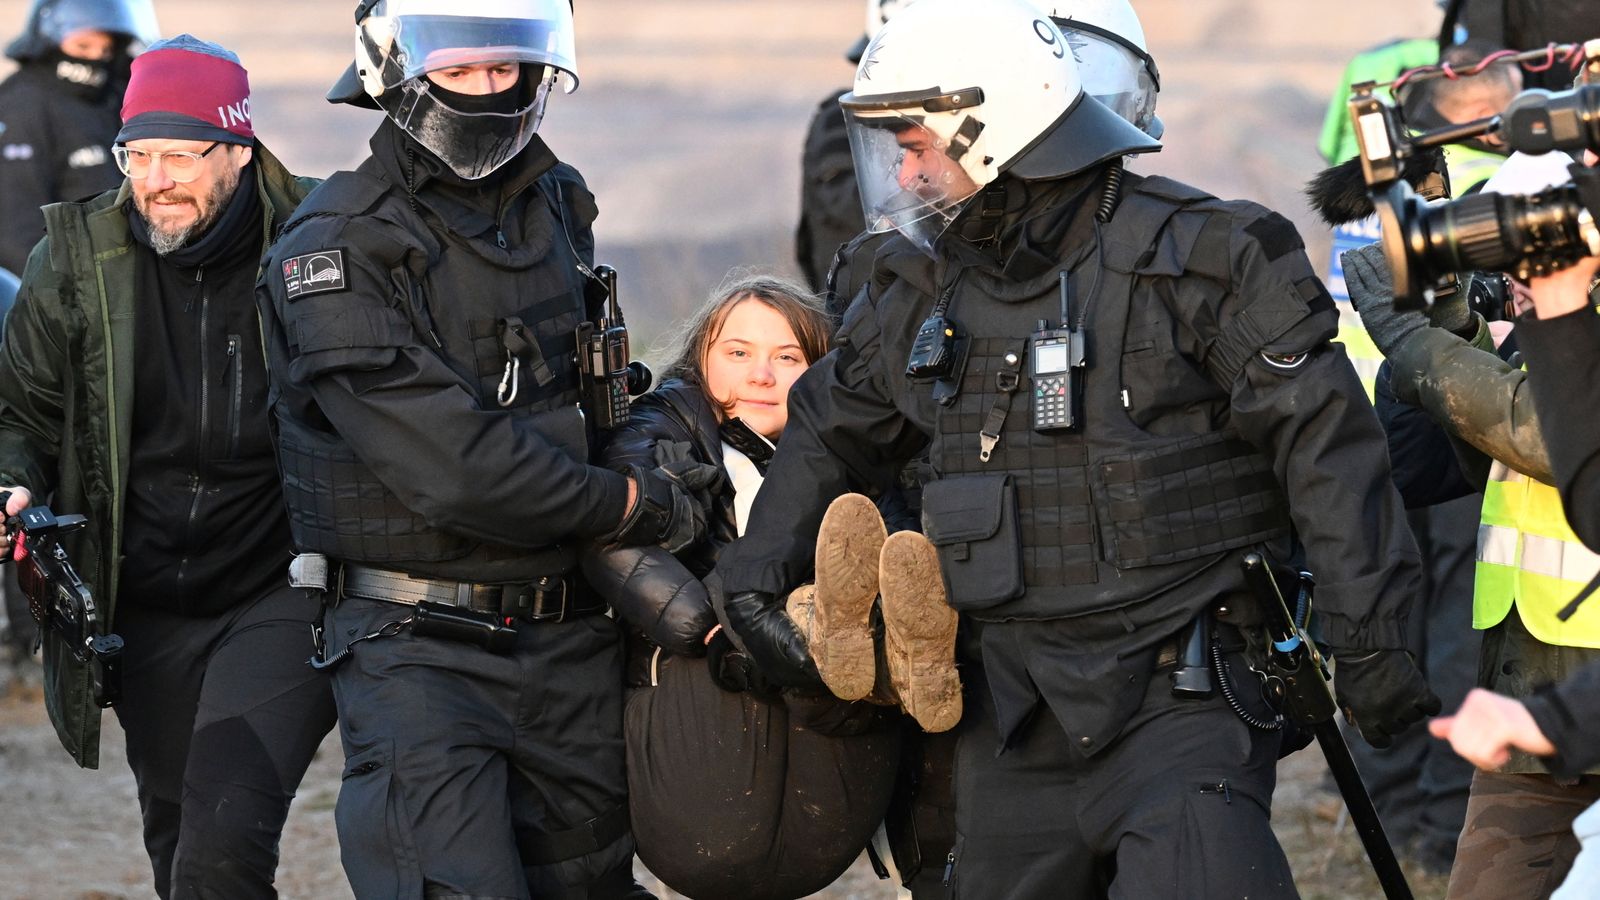 Greta Thunberg detained by police during eco protest in German village